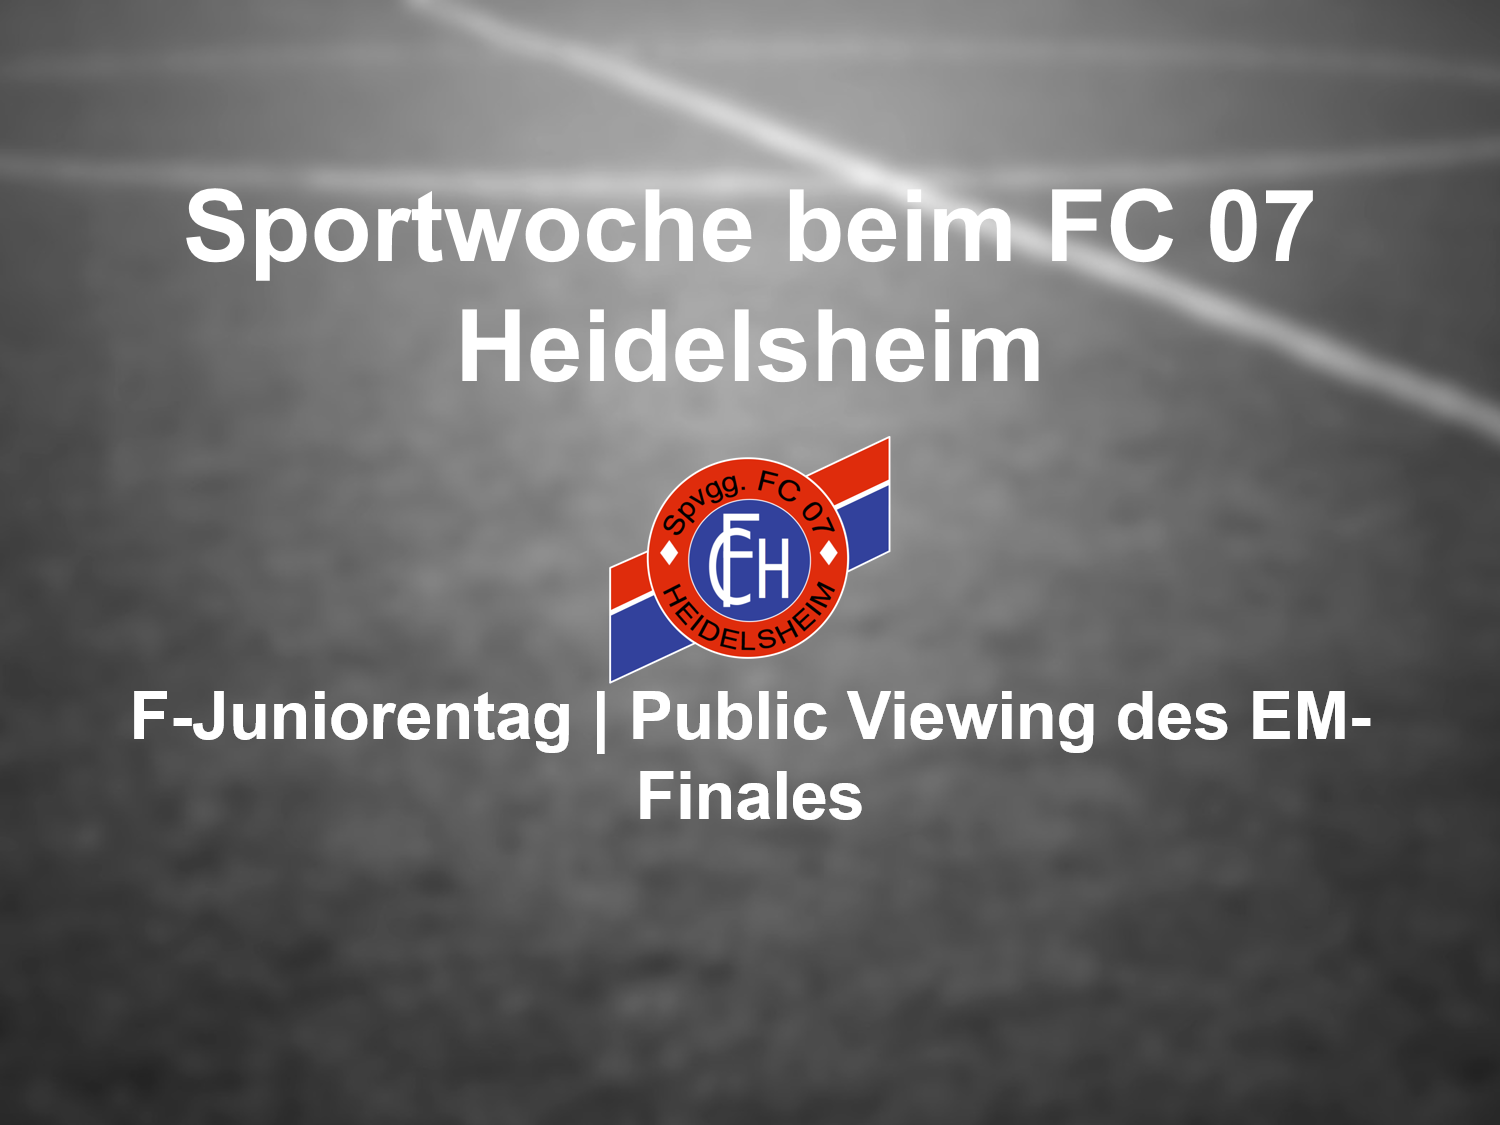 You are currently viewing FC 07 Sportwoche 08. bis 11. Juli 2016